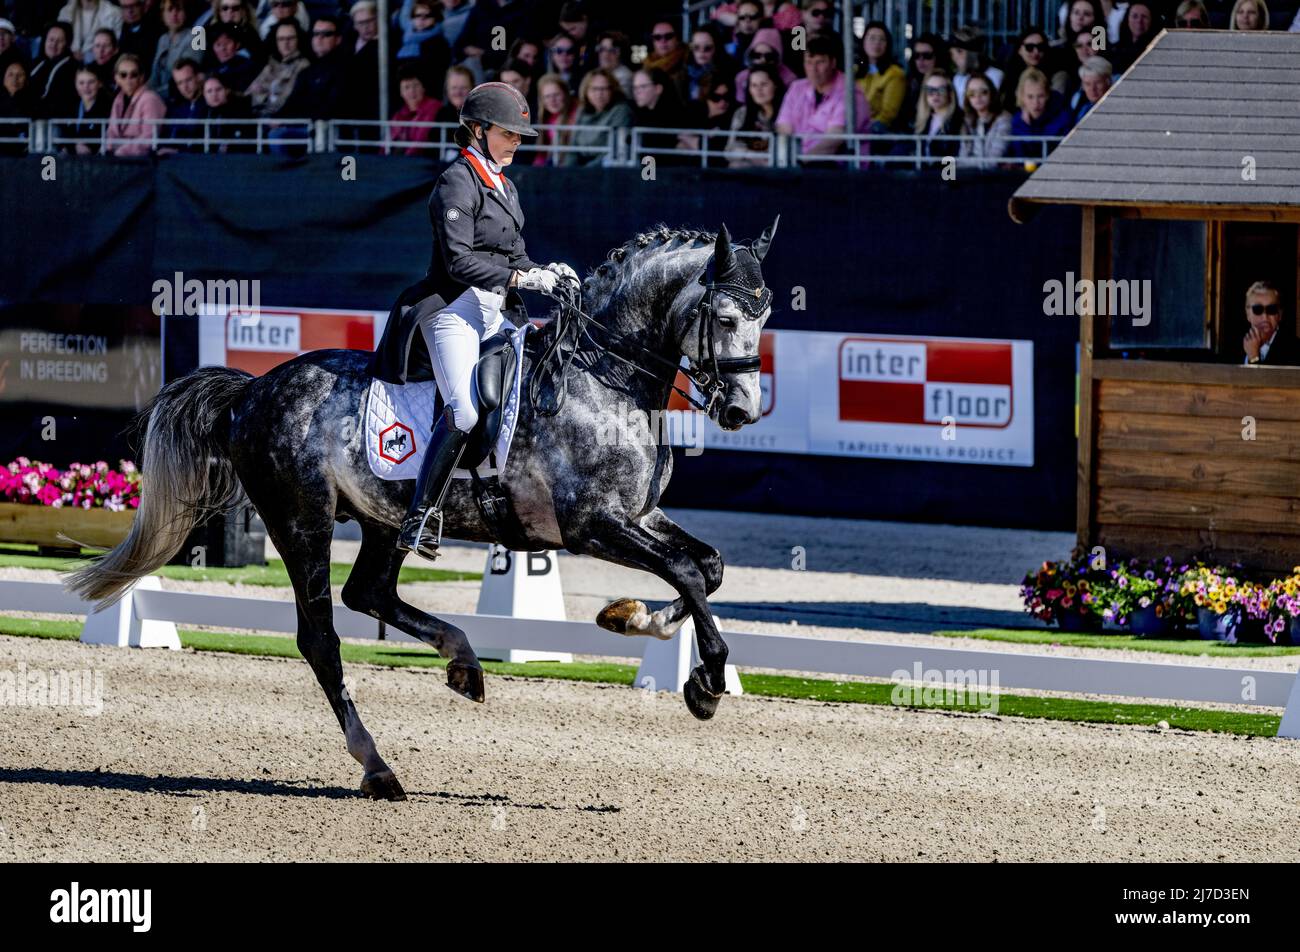 2022-05-08 16:30:18 ERMELO - Thamar Zweistra finished second with Hexagon's Ich Weiss during the Dutch Dressage Championship. ANP ROBIN UTRECHT netherlands out - belgium out Stock Photo